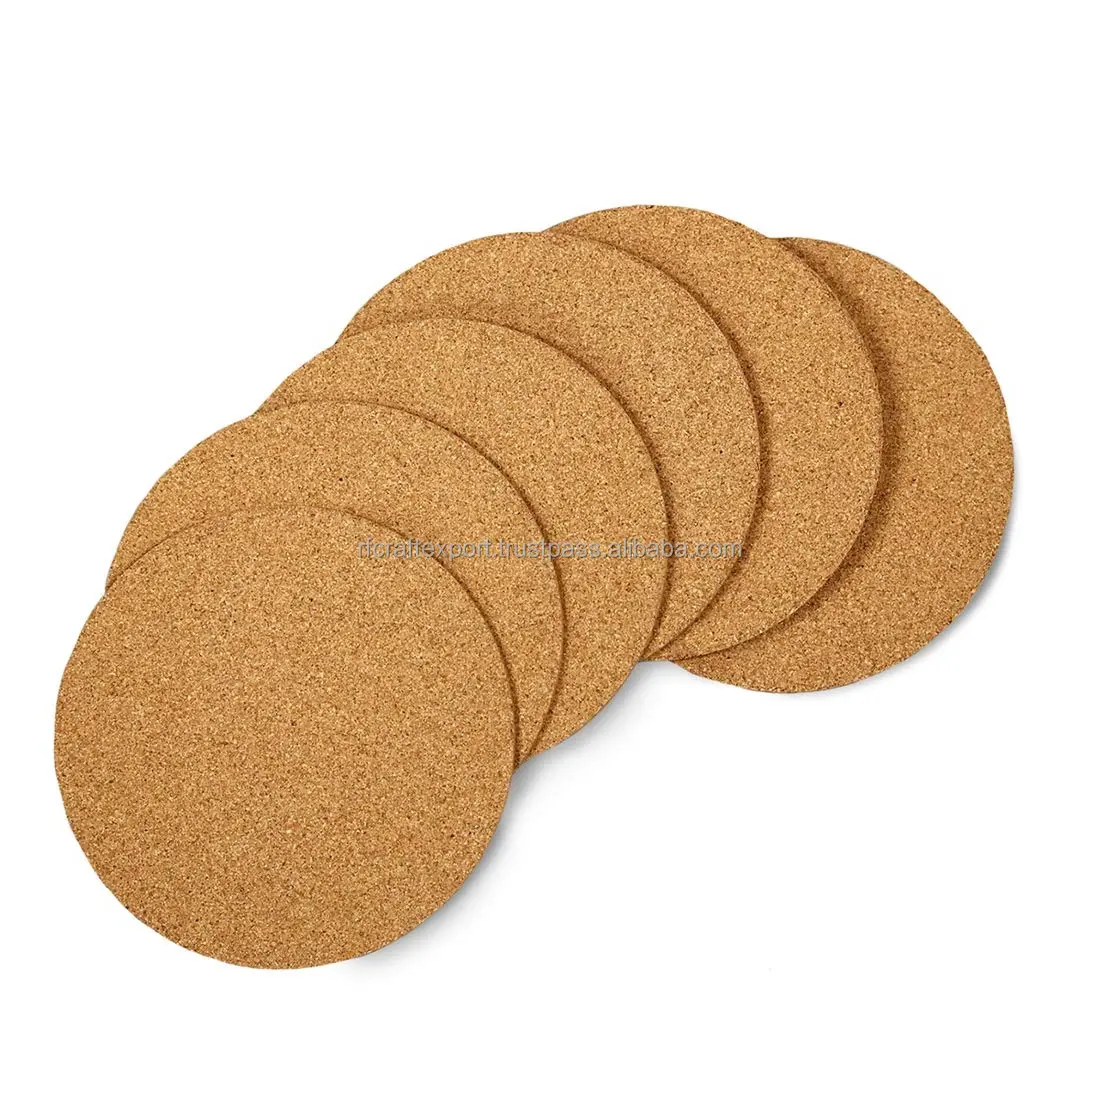 New Indian made luxury Cork Coasters by RF Crafts